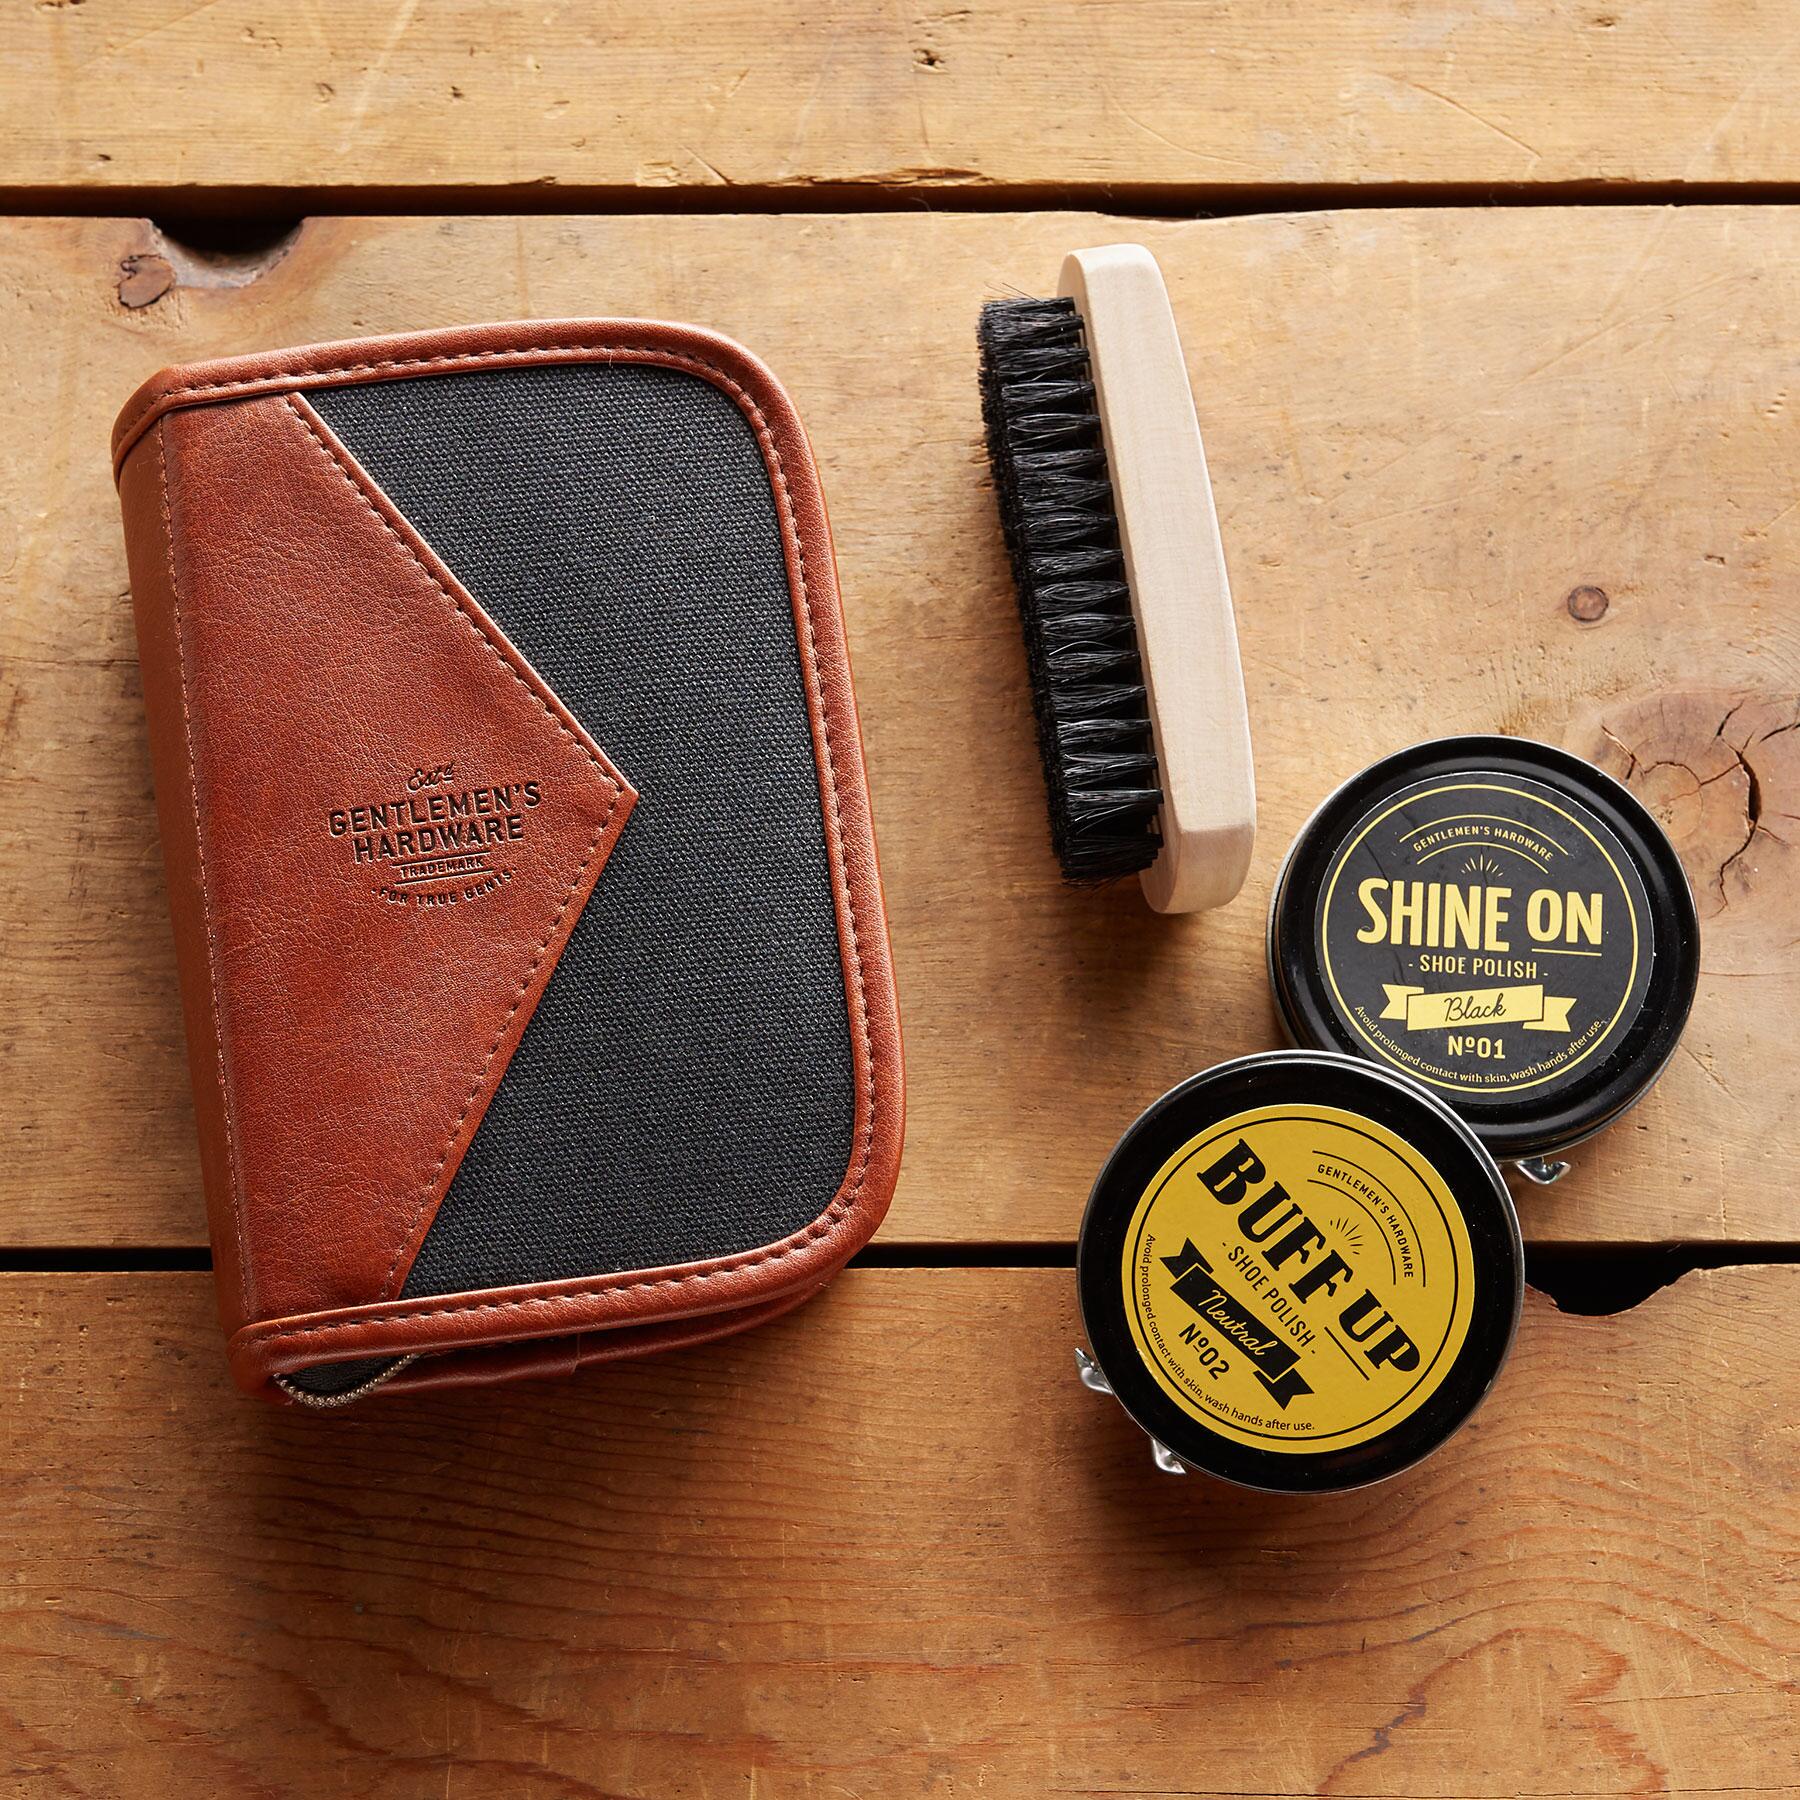 the shoe shine kit displayed beside the case on wood planks